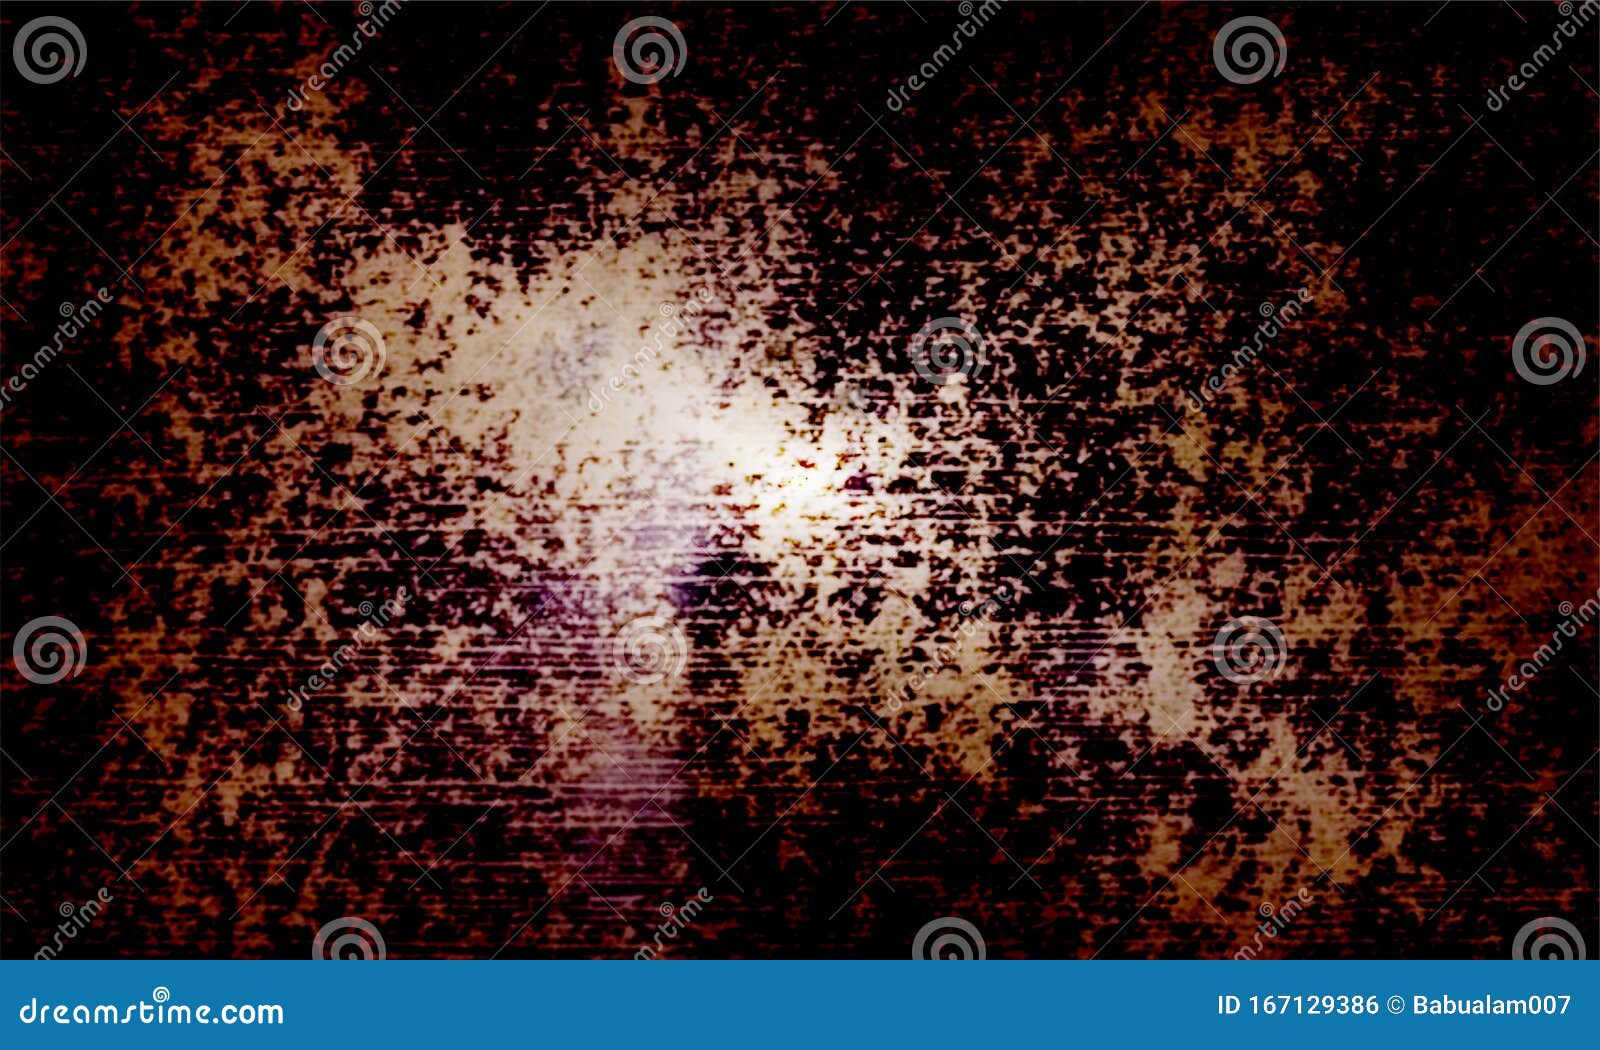 Abstract Dark Maroon Color Mixture Multi Colors Effects Wall Texture  Background. Stock Illustration - Illustration of book, maroon: 167129386